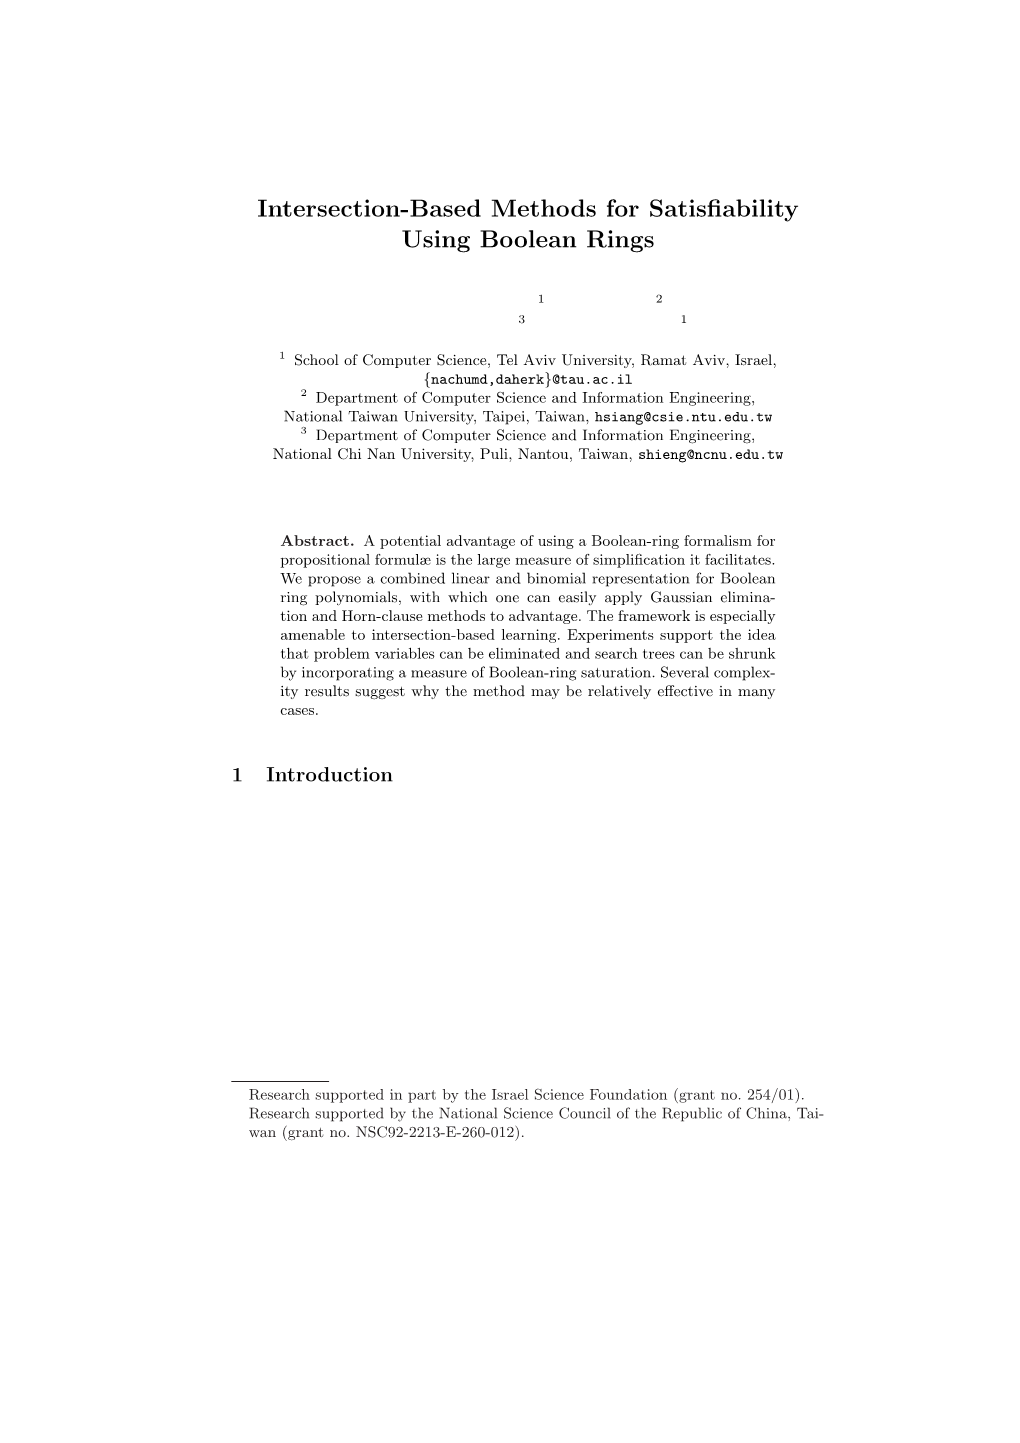 Intersection-Based Methods for Satisfiability Using Boolean Rings